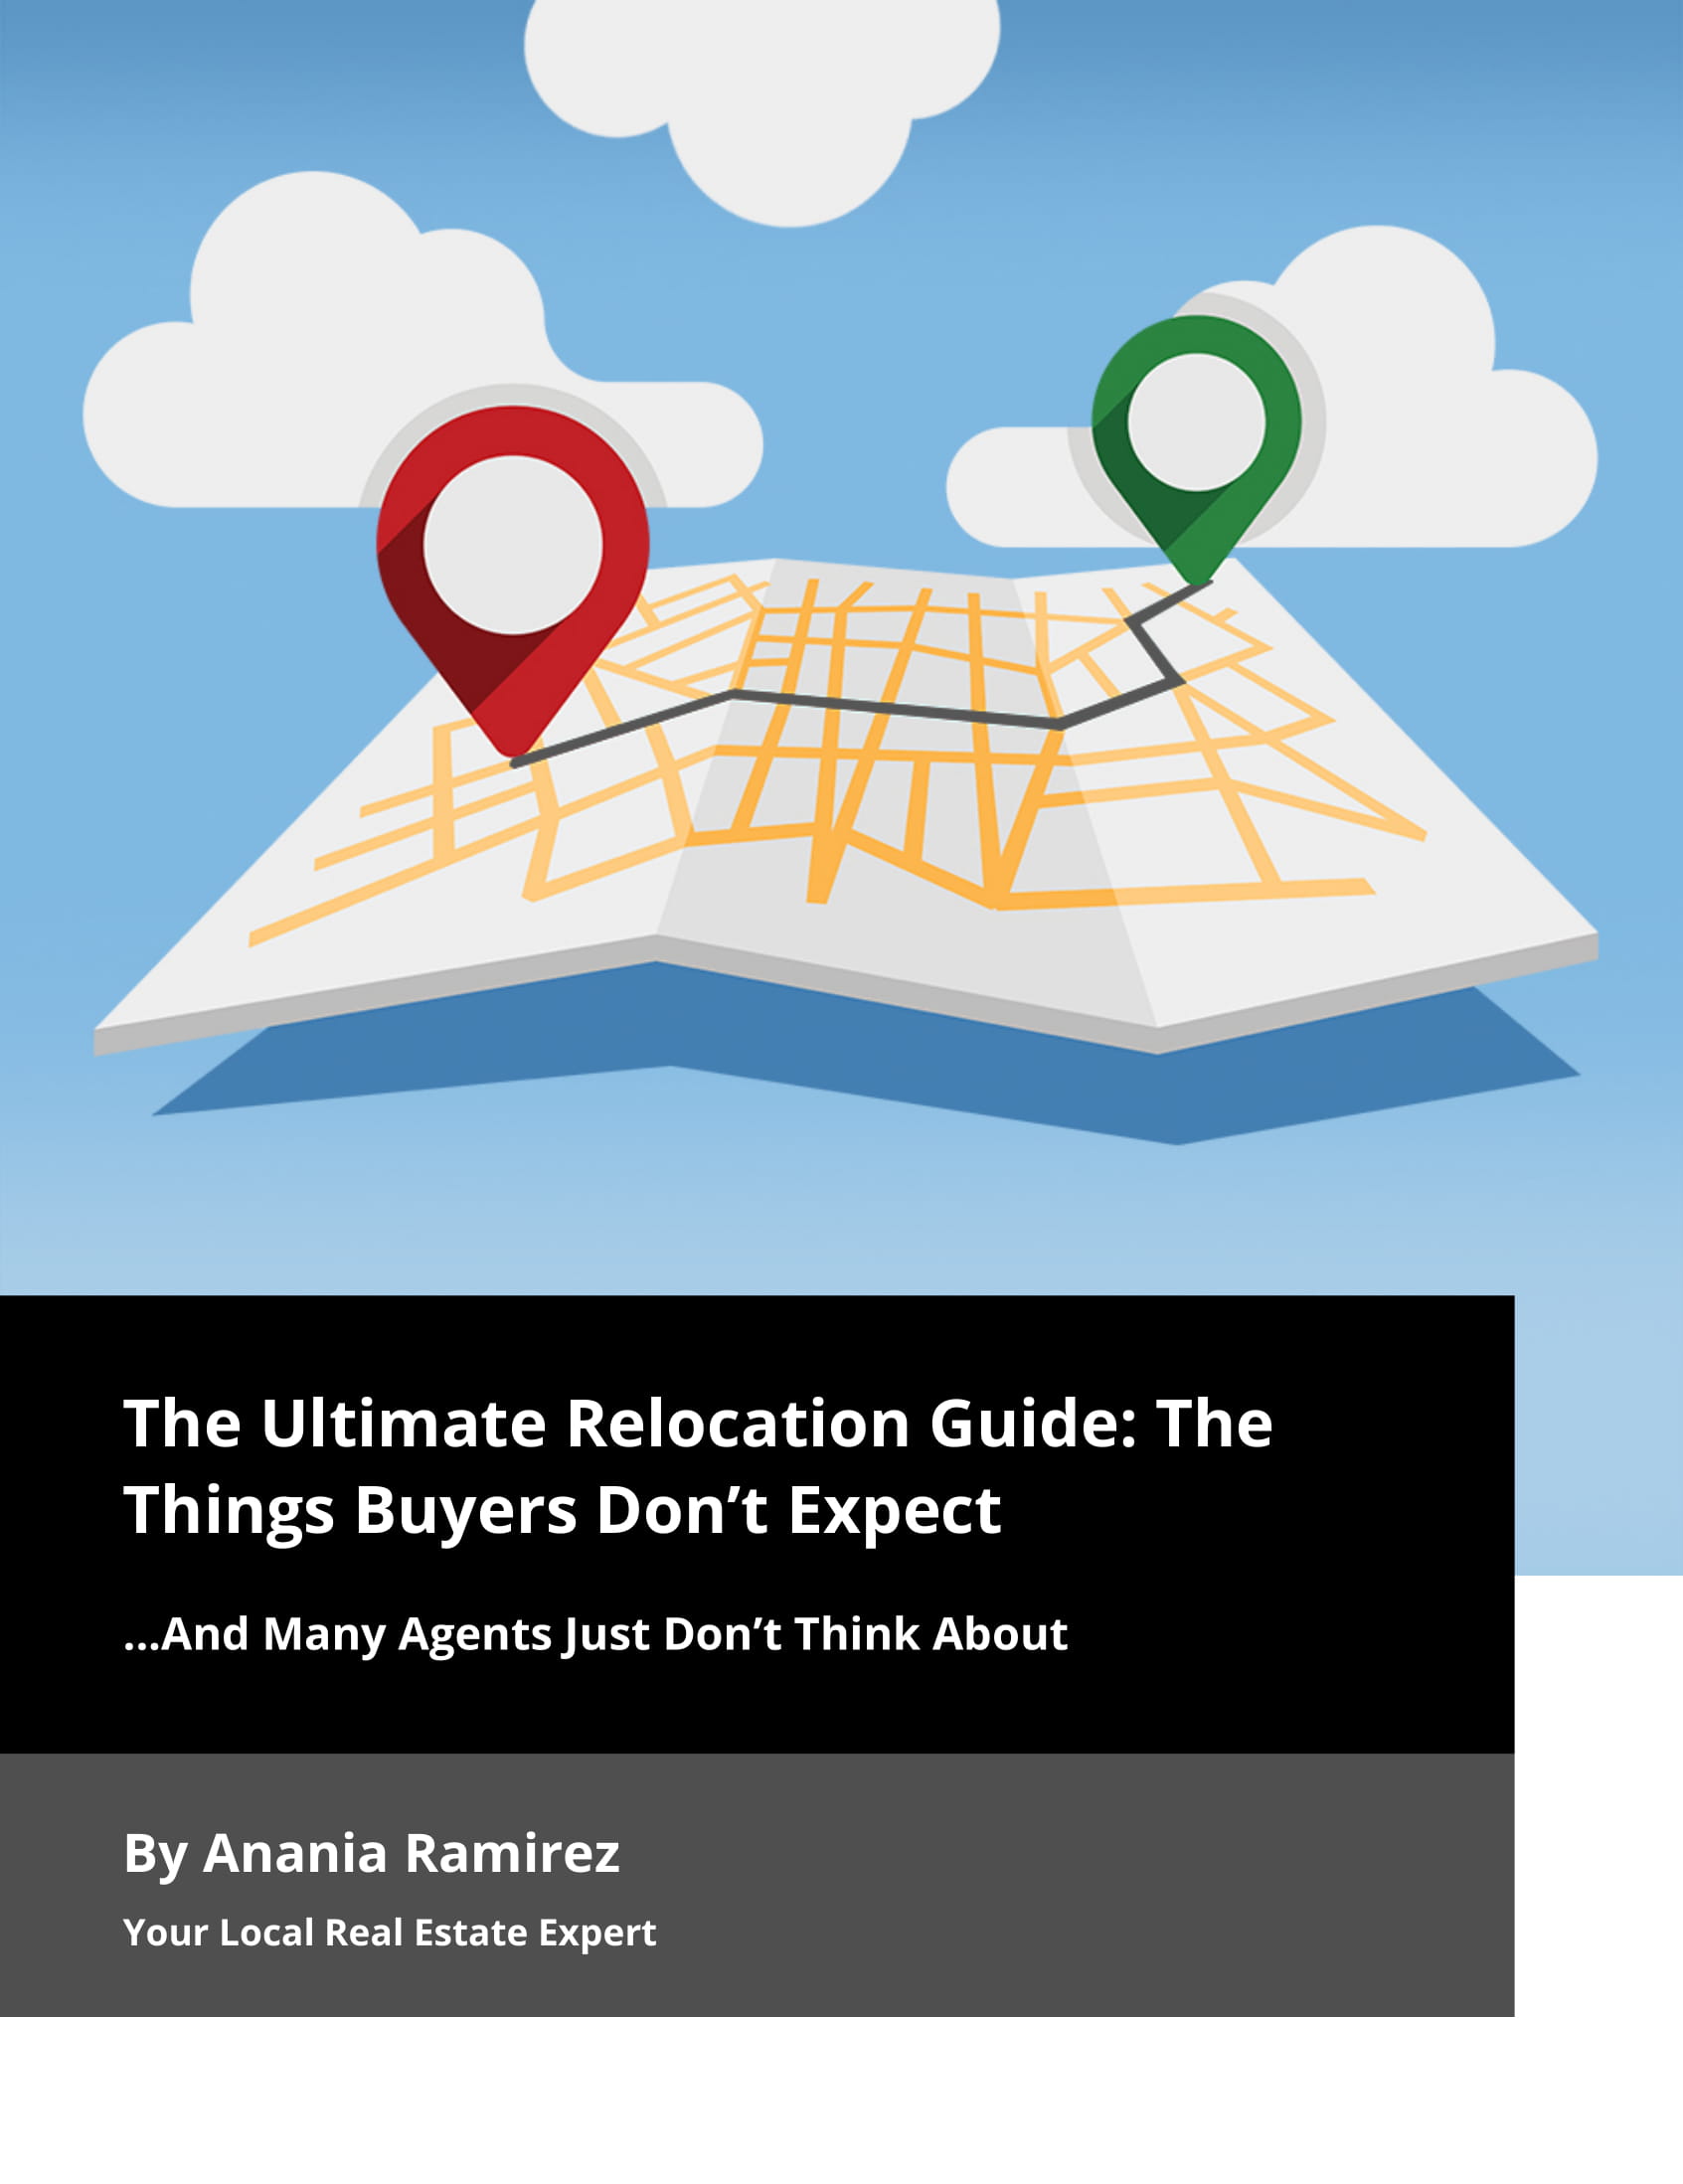 The Ultimate Relocation Guide: The Things Buyers Don’t Expect